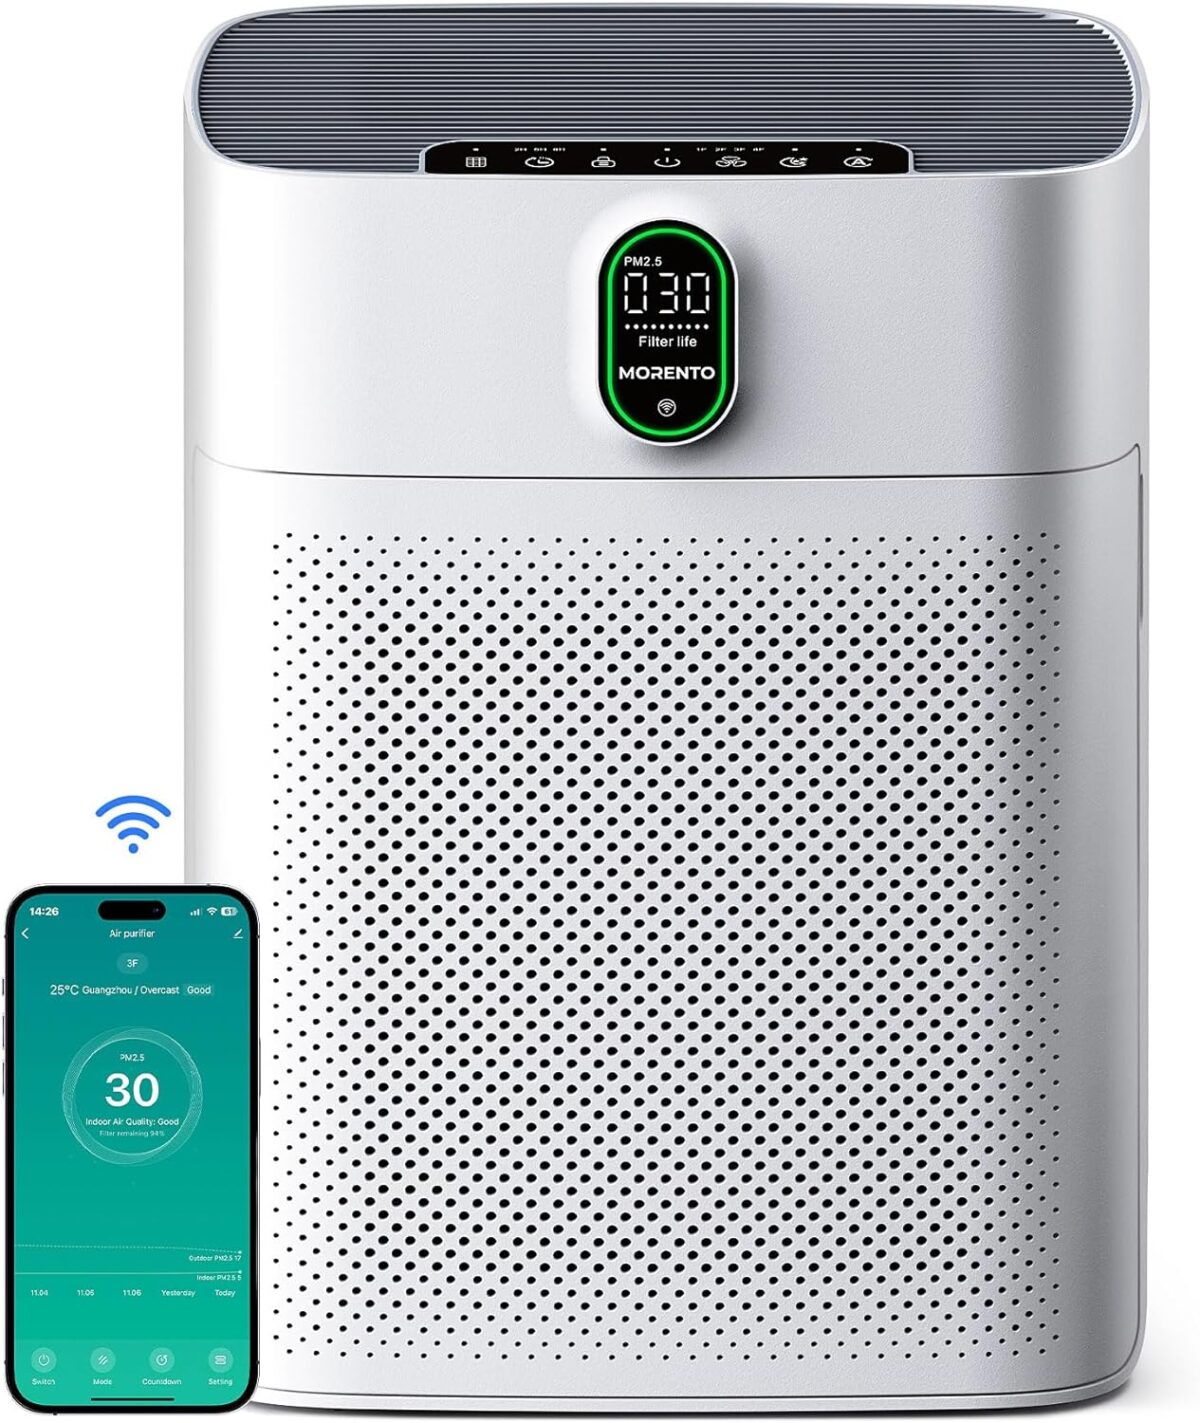 Wi-fi-enabled air purifier with digital display connected to a smartphone app.